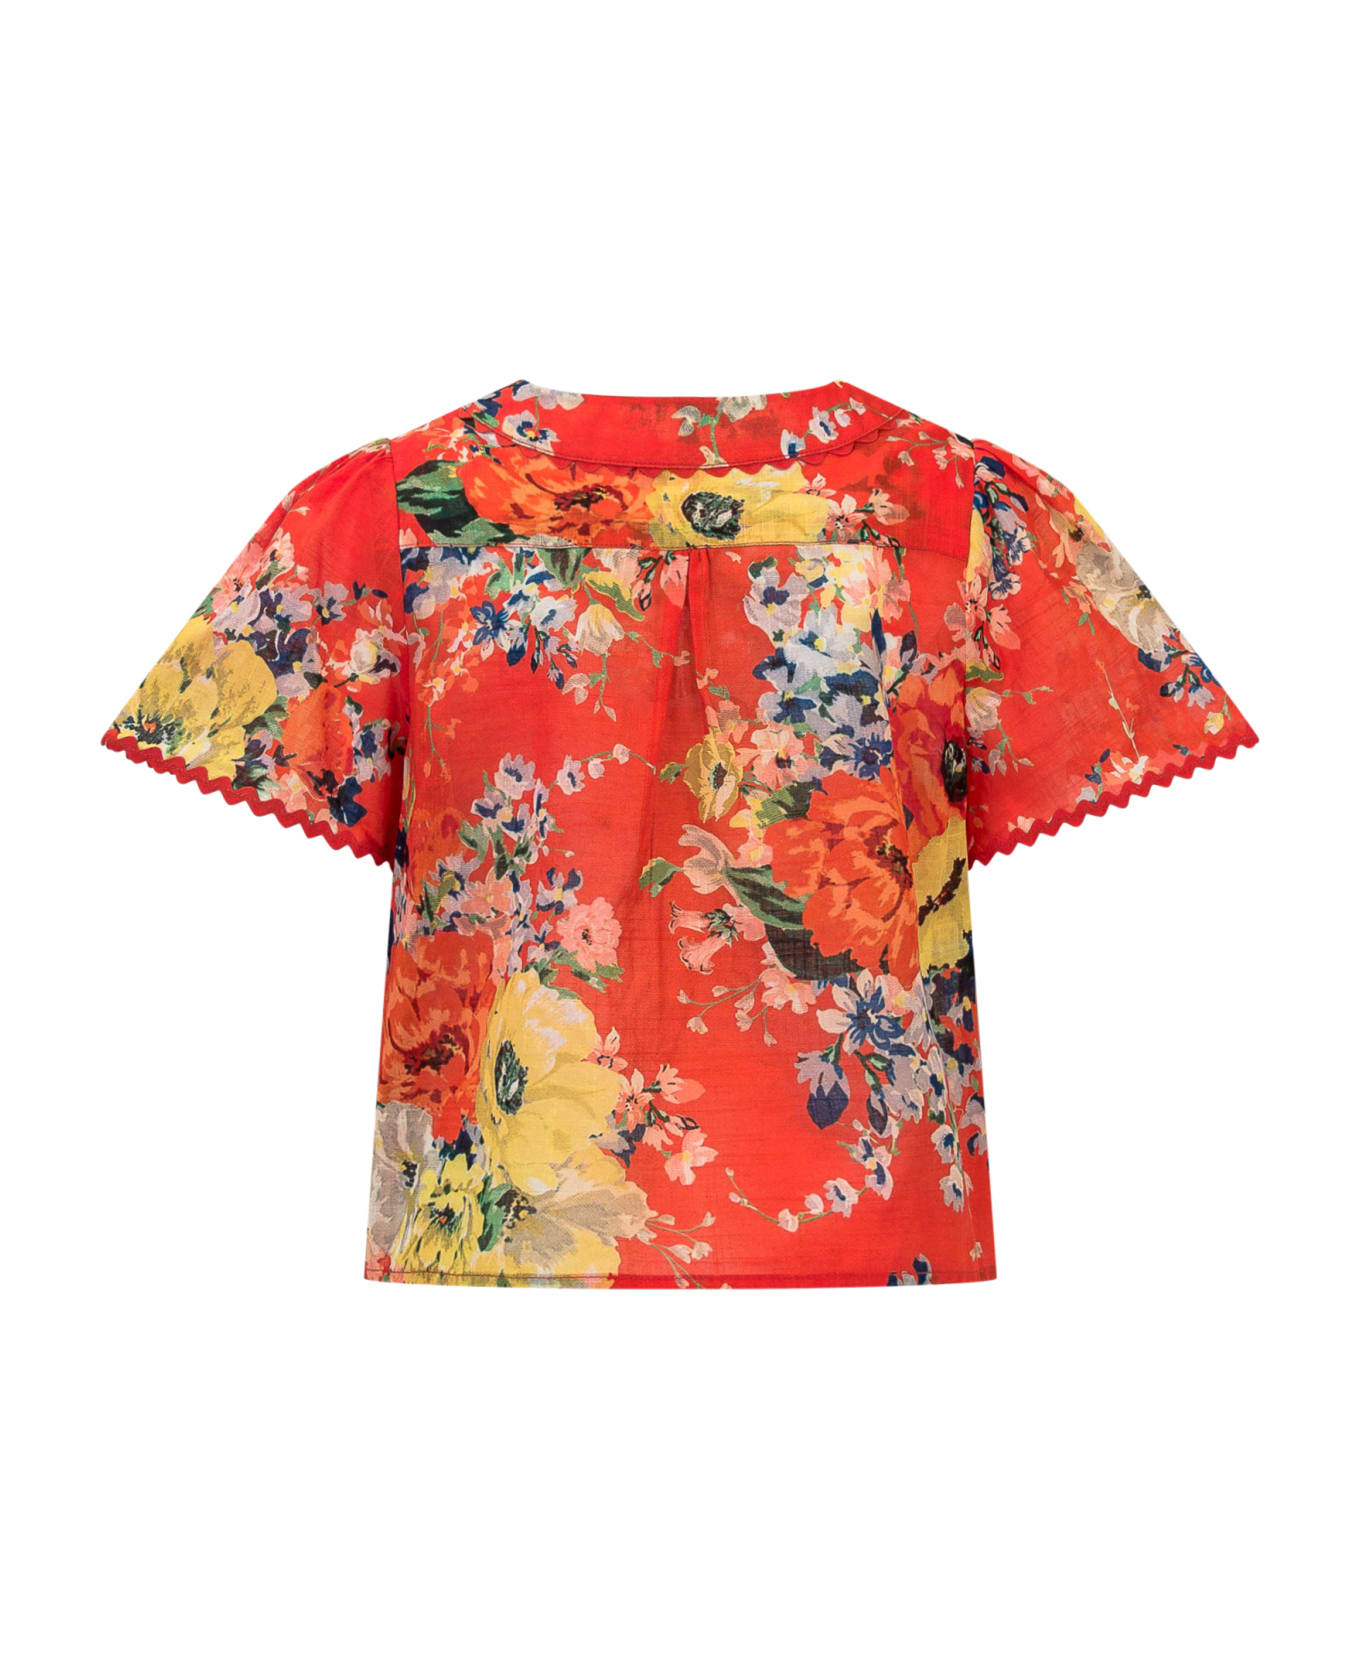 Zimmermann Alight Craddle - RED FLORAL